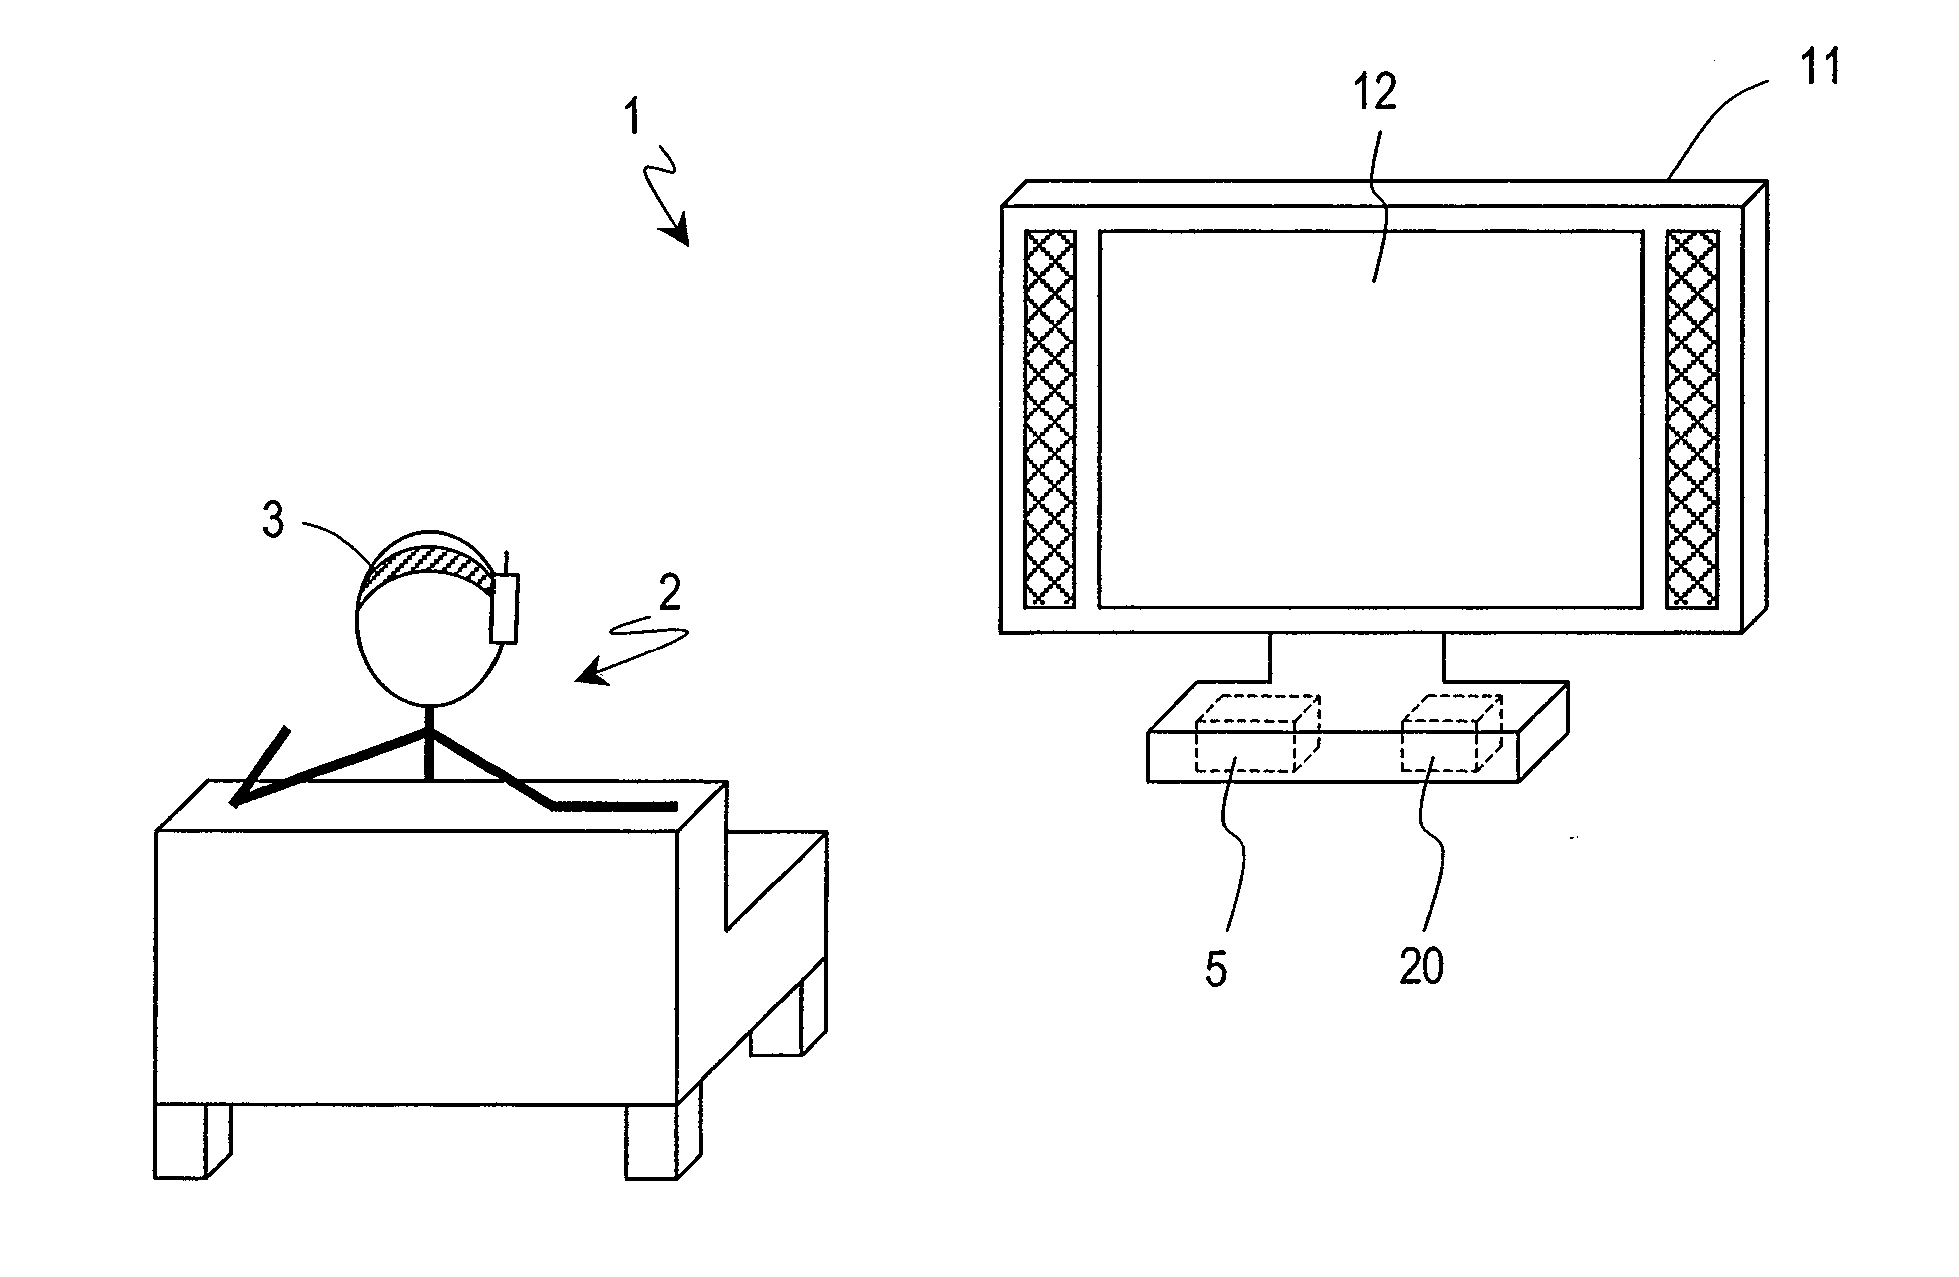 Activation apparatus, method, and computer program for brainwave interface system